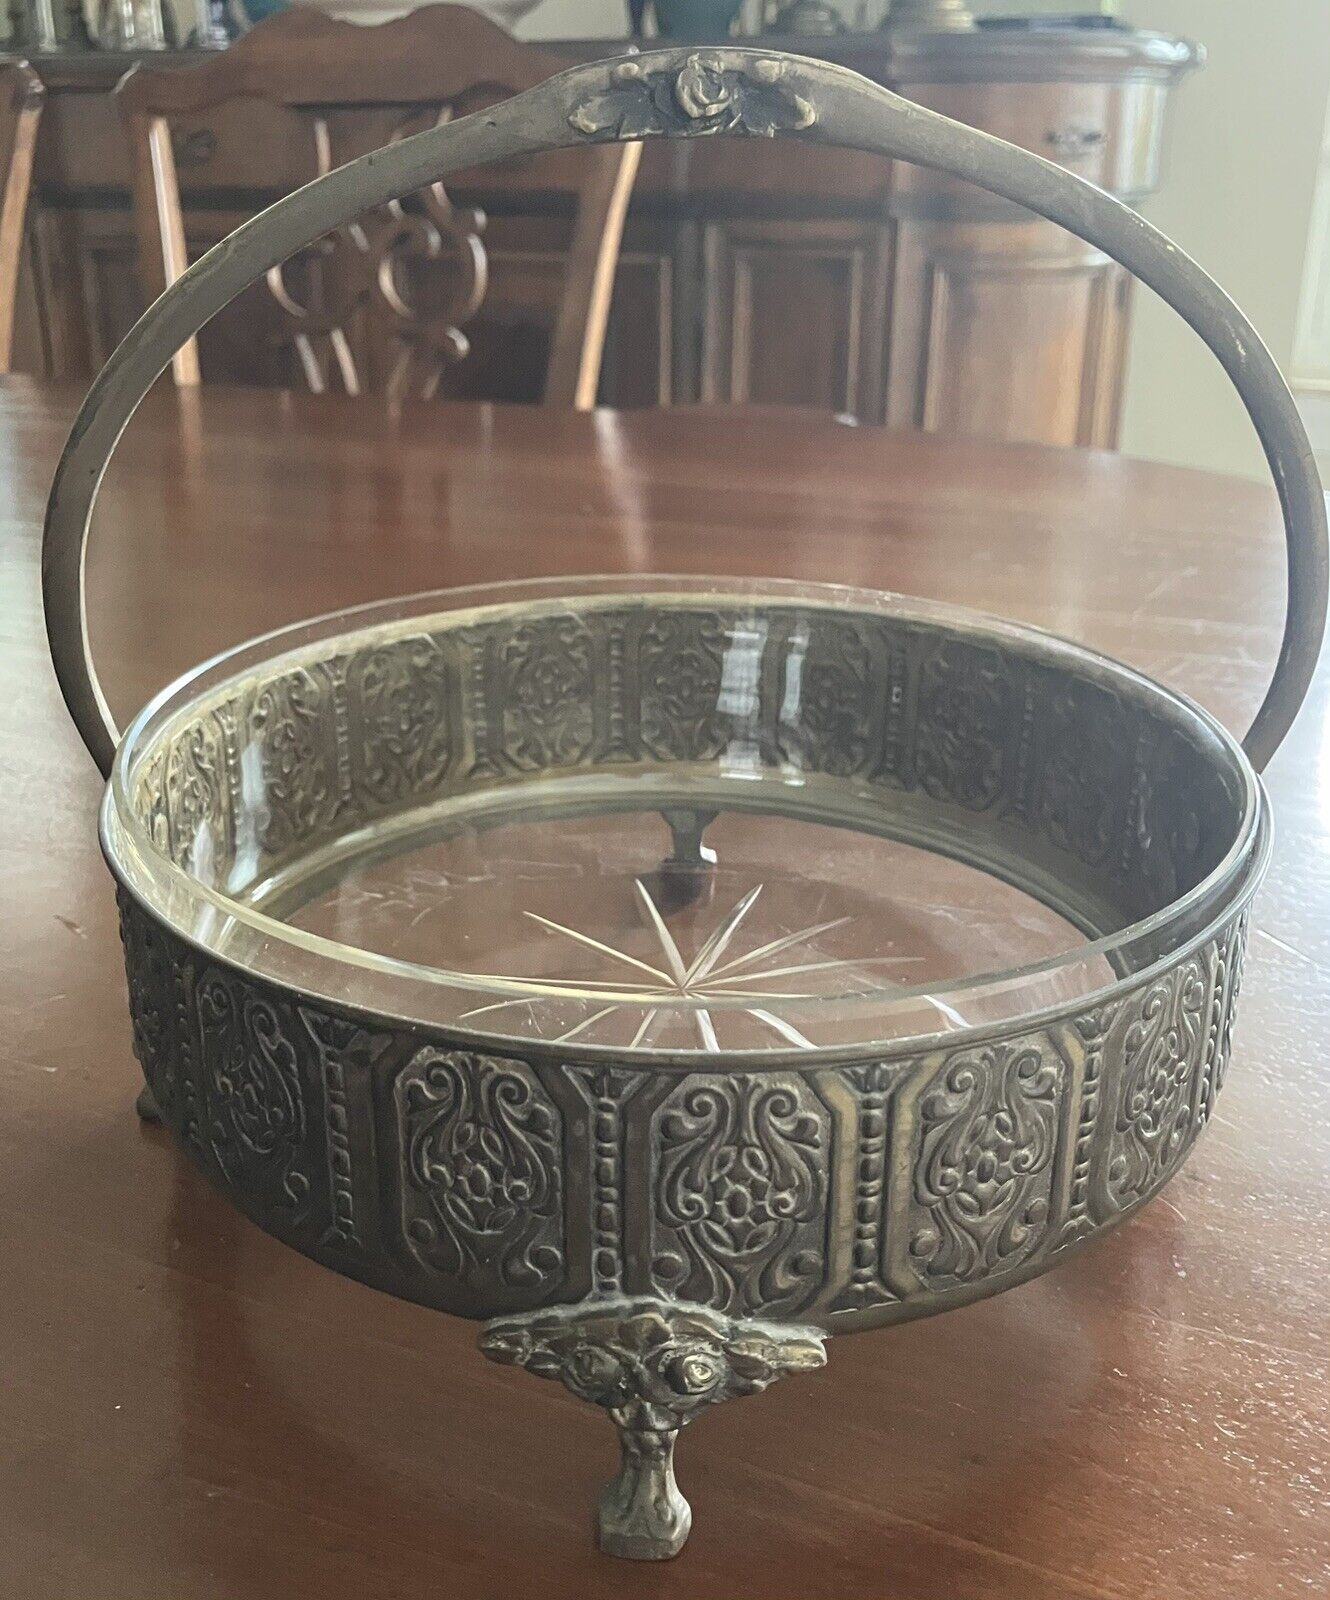 Vintage Ornate Bronze Handled Bowl With Etched Glass Insert